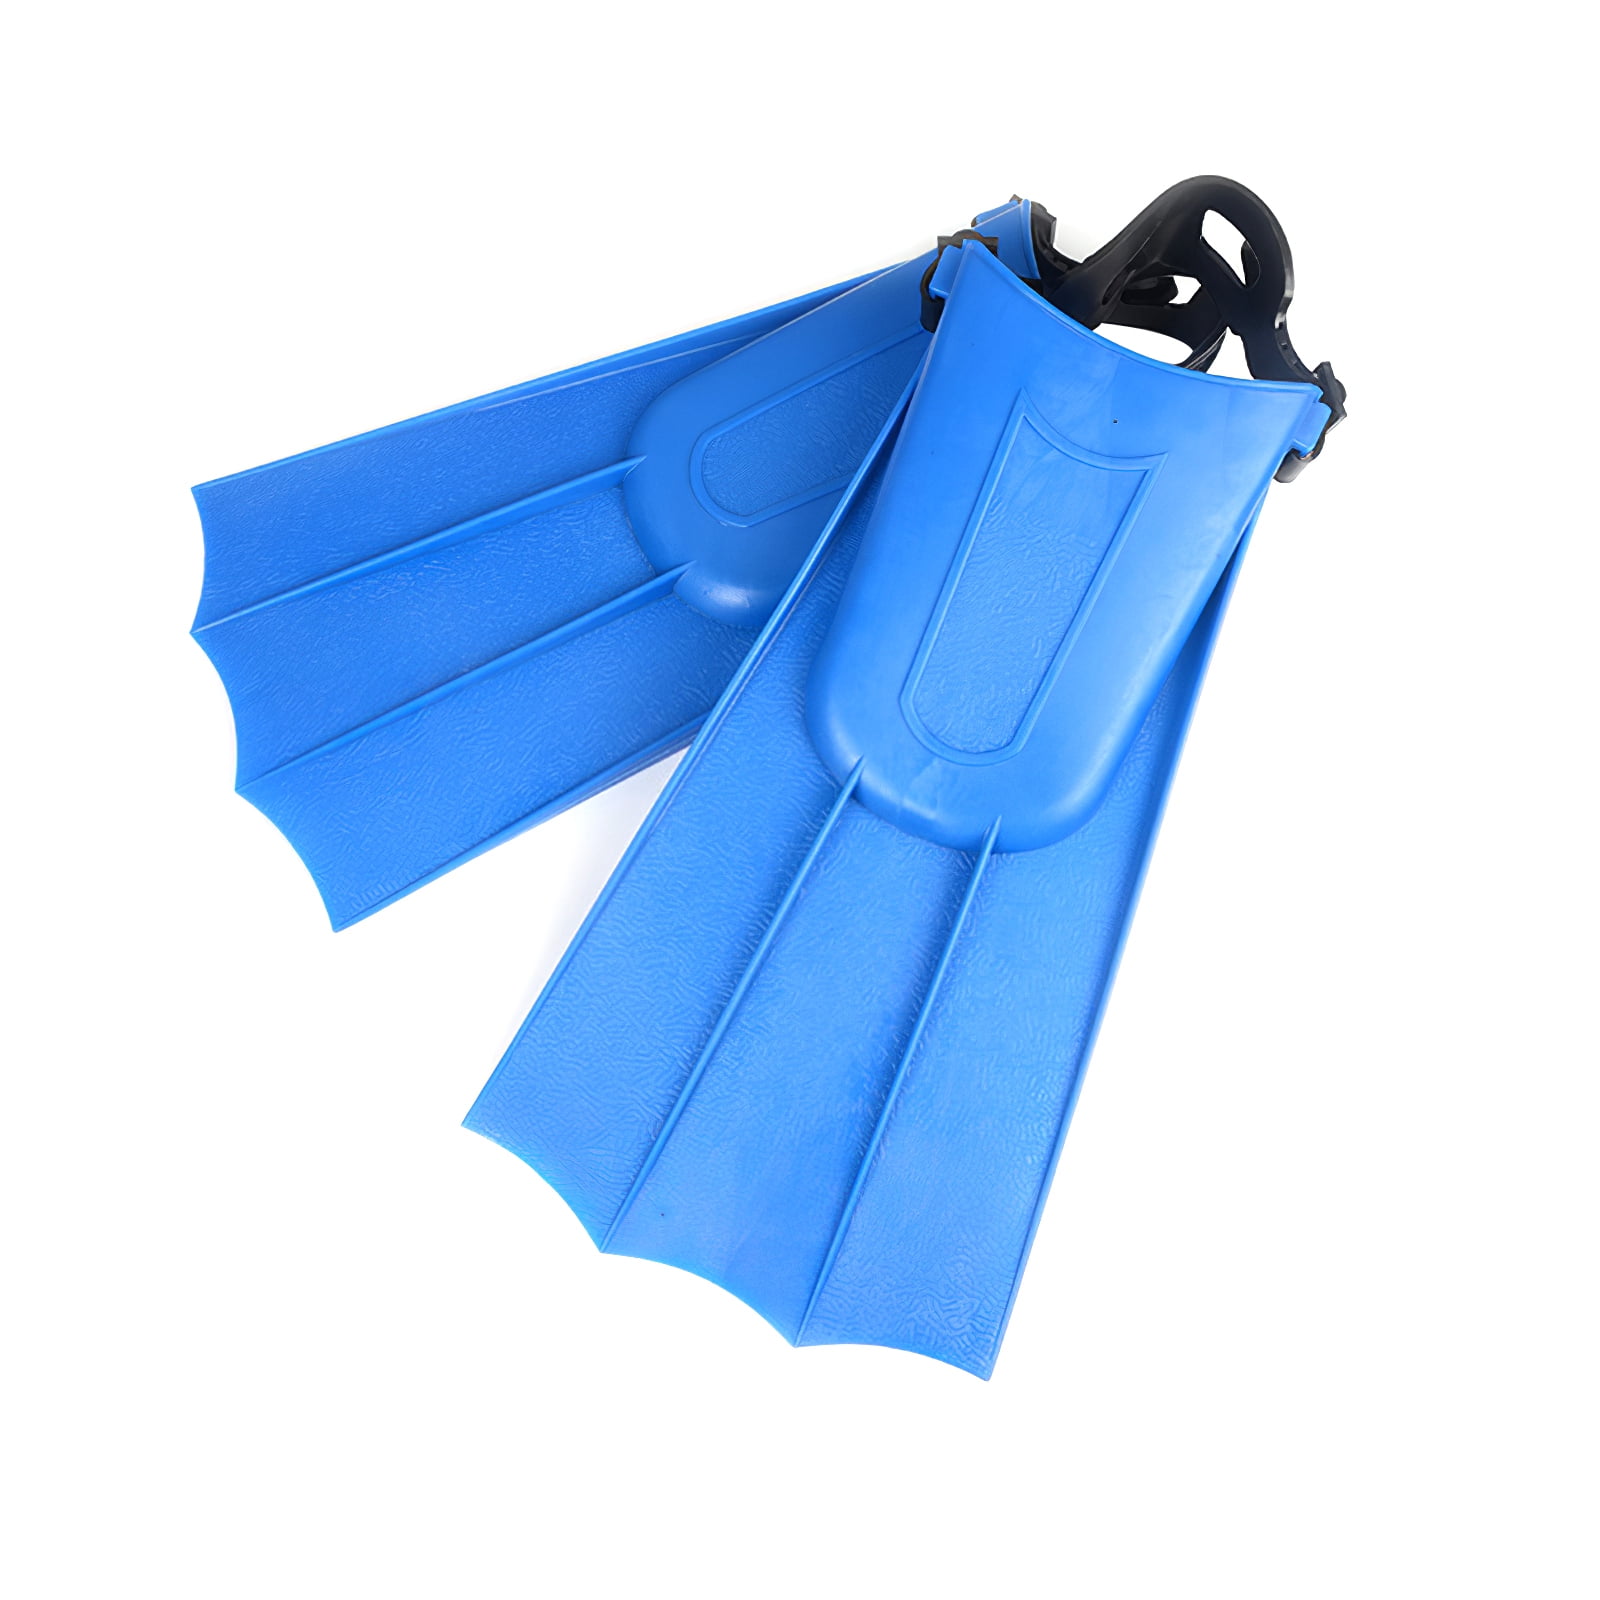 Details about   Rubber Durable Diving   Strap Flipper Replacement Band Holder Accessories 